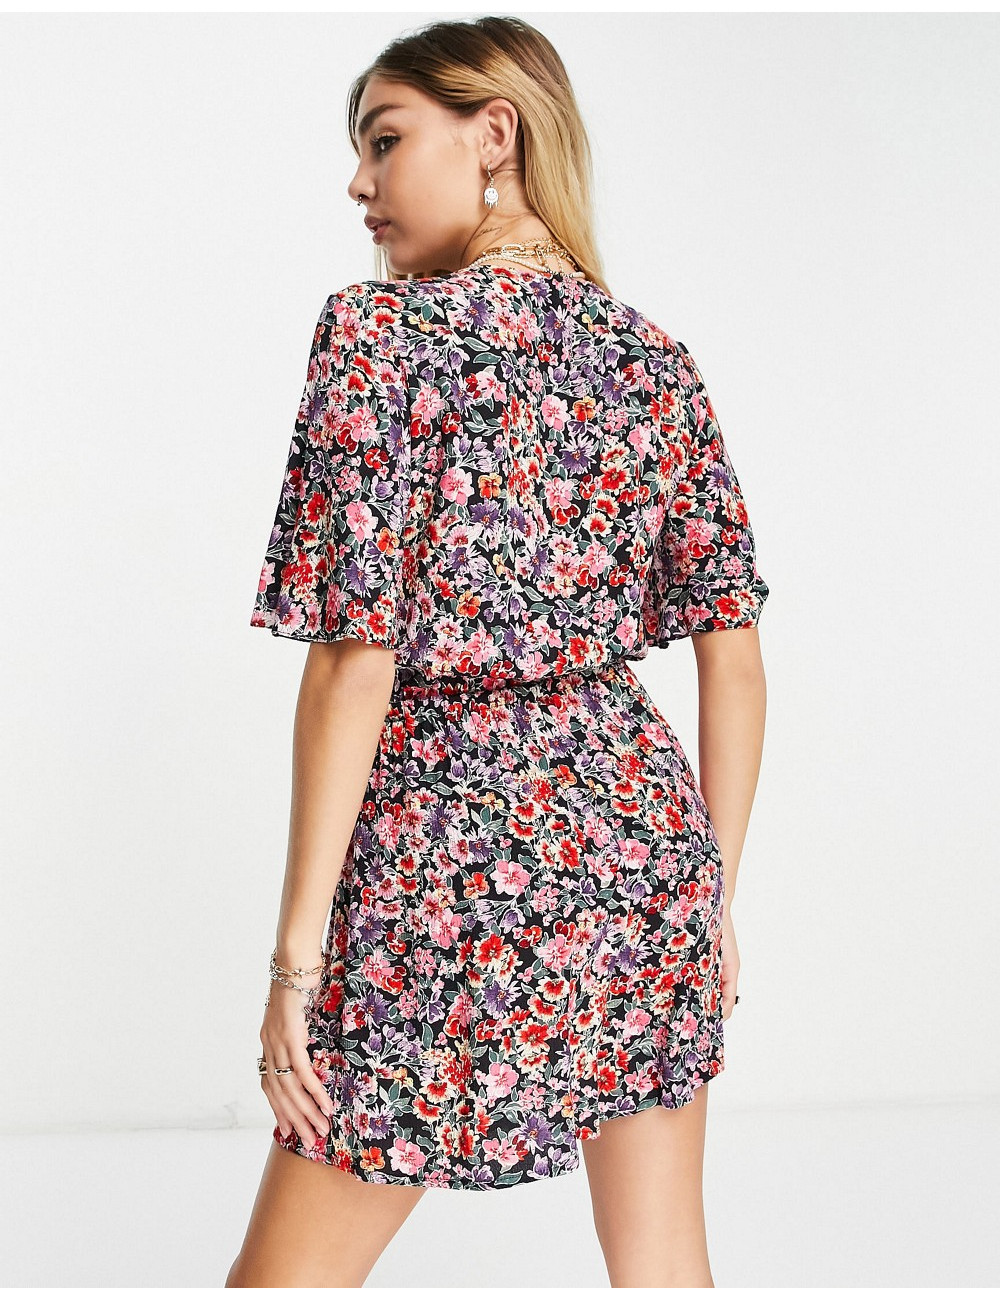 Topshop Playsuit in peony...